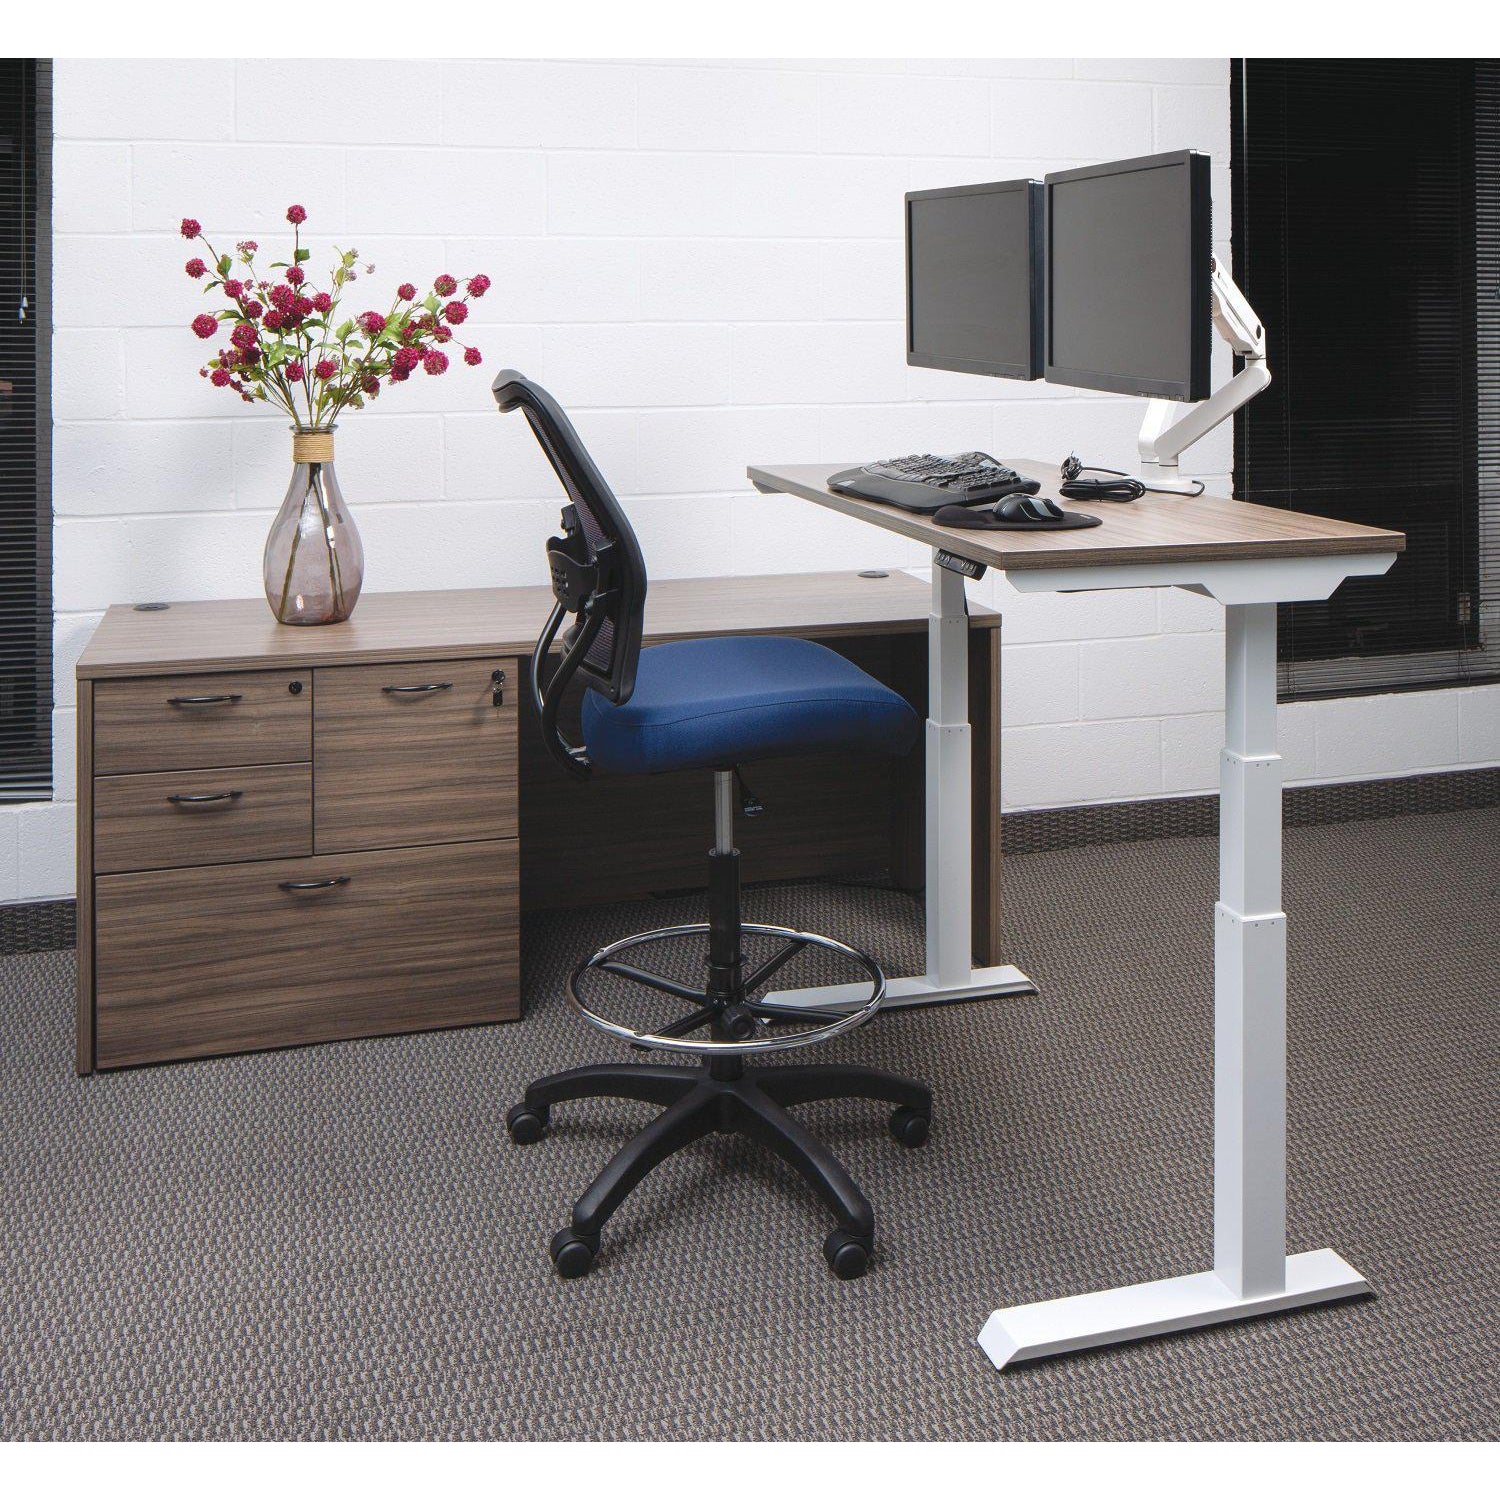 Ascend II 3-Stage Electric Height Adjustable Rectangular Tables